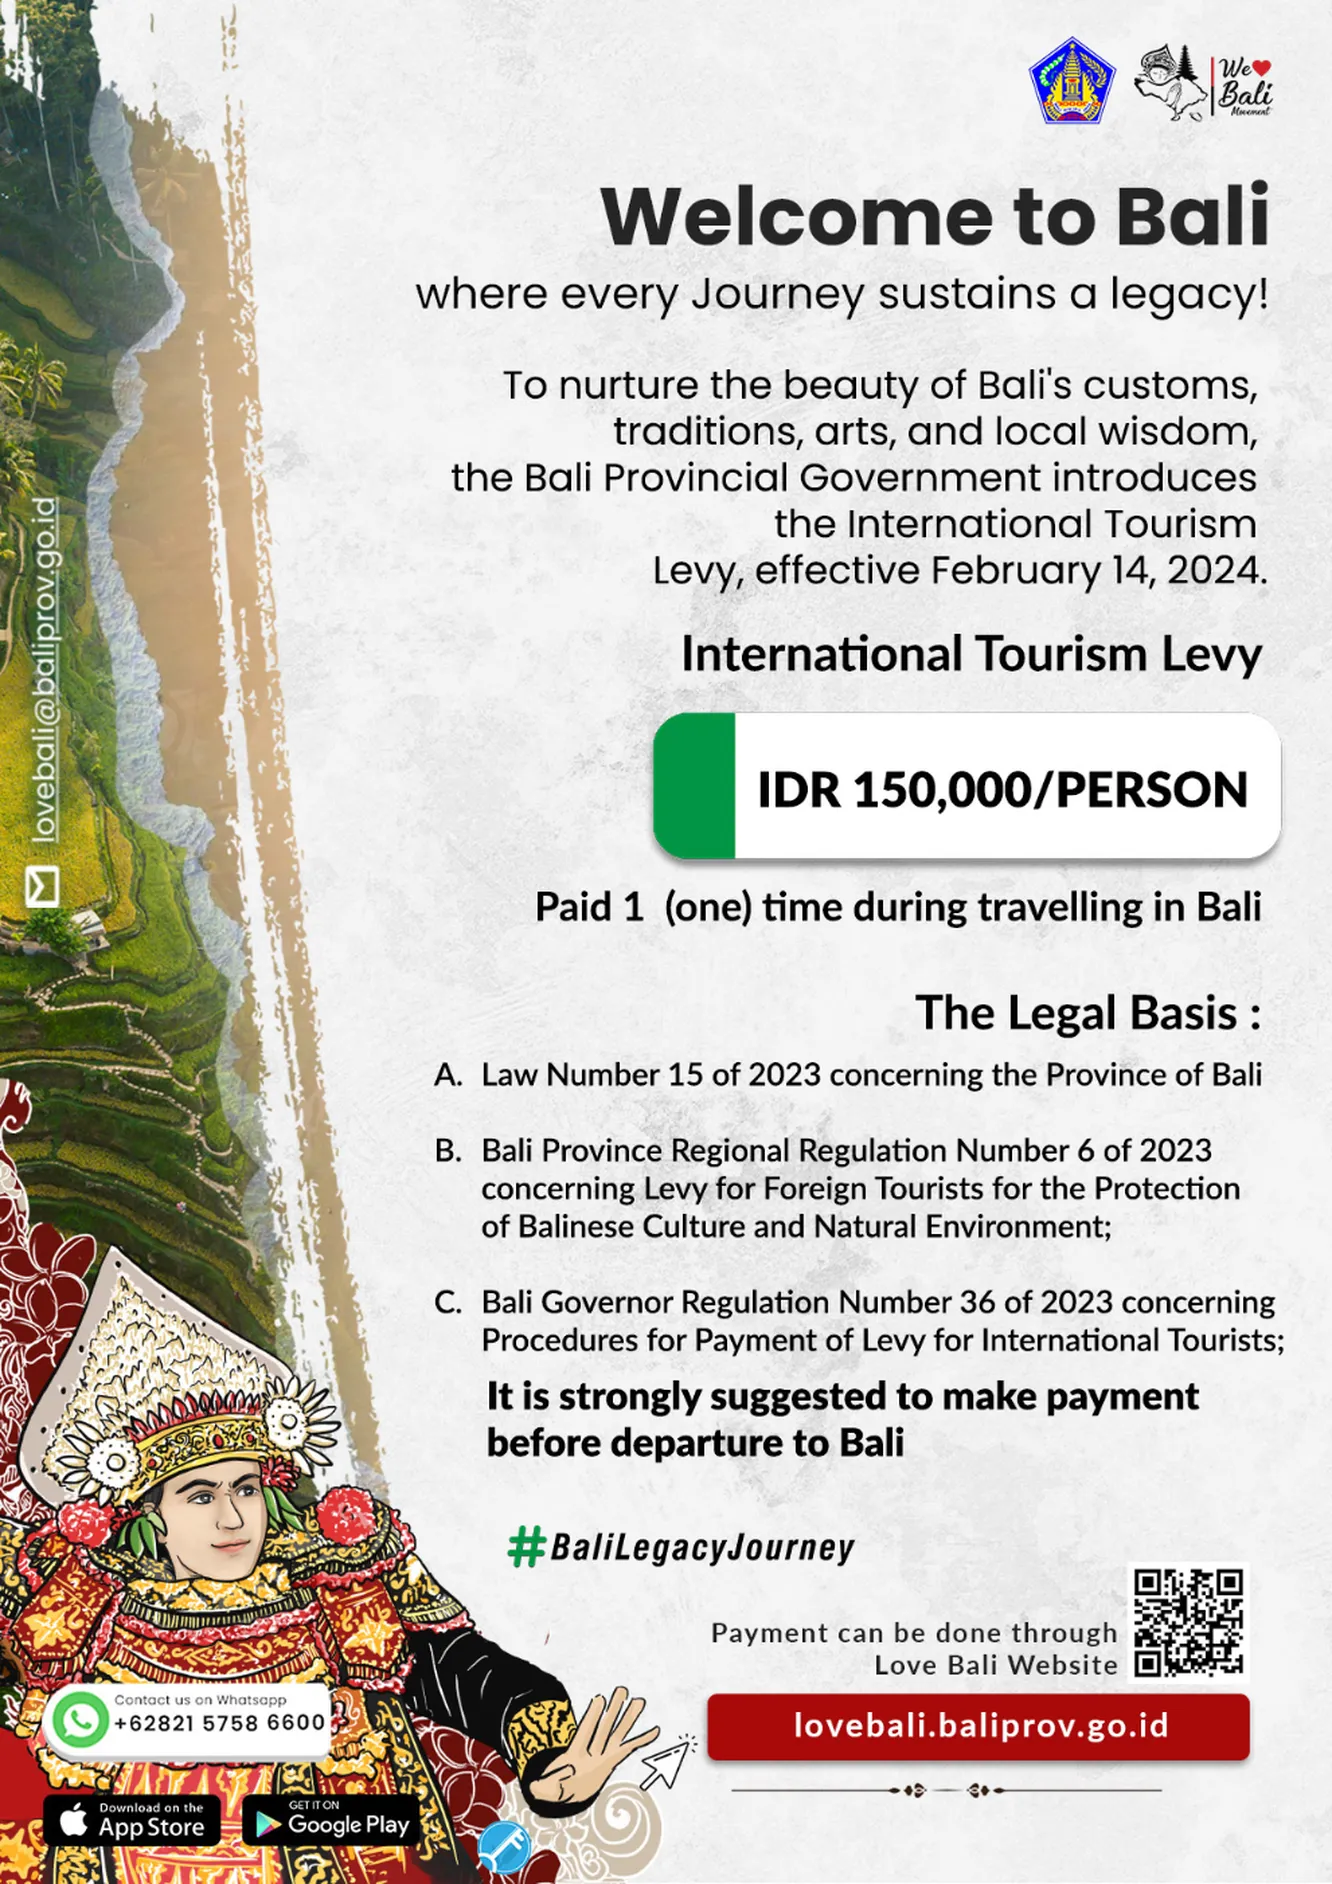 A new tourist tax has been introduced in Bali. But not everyone can contribute to it